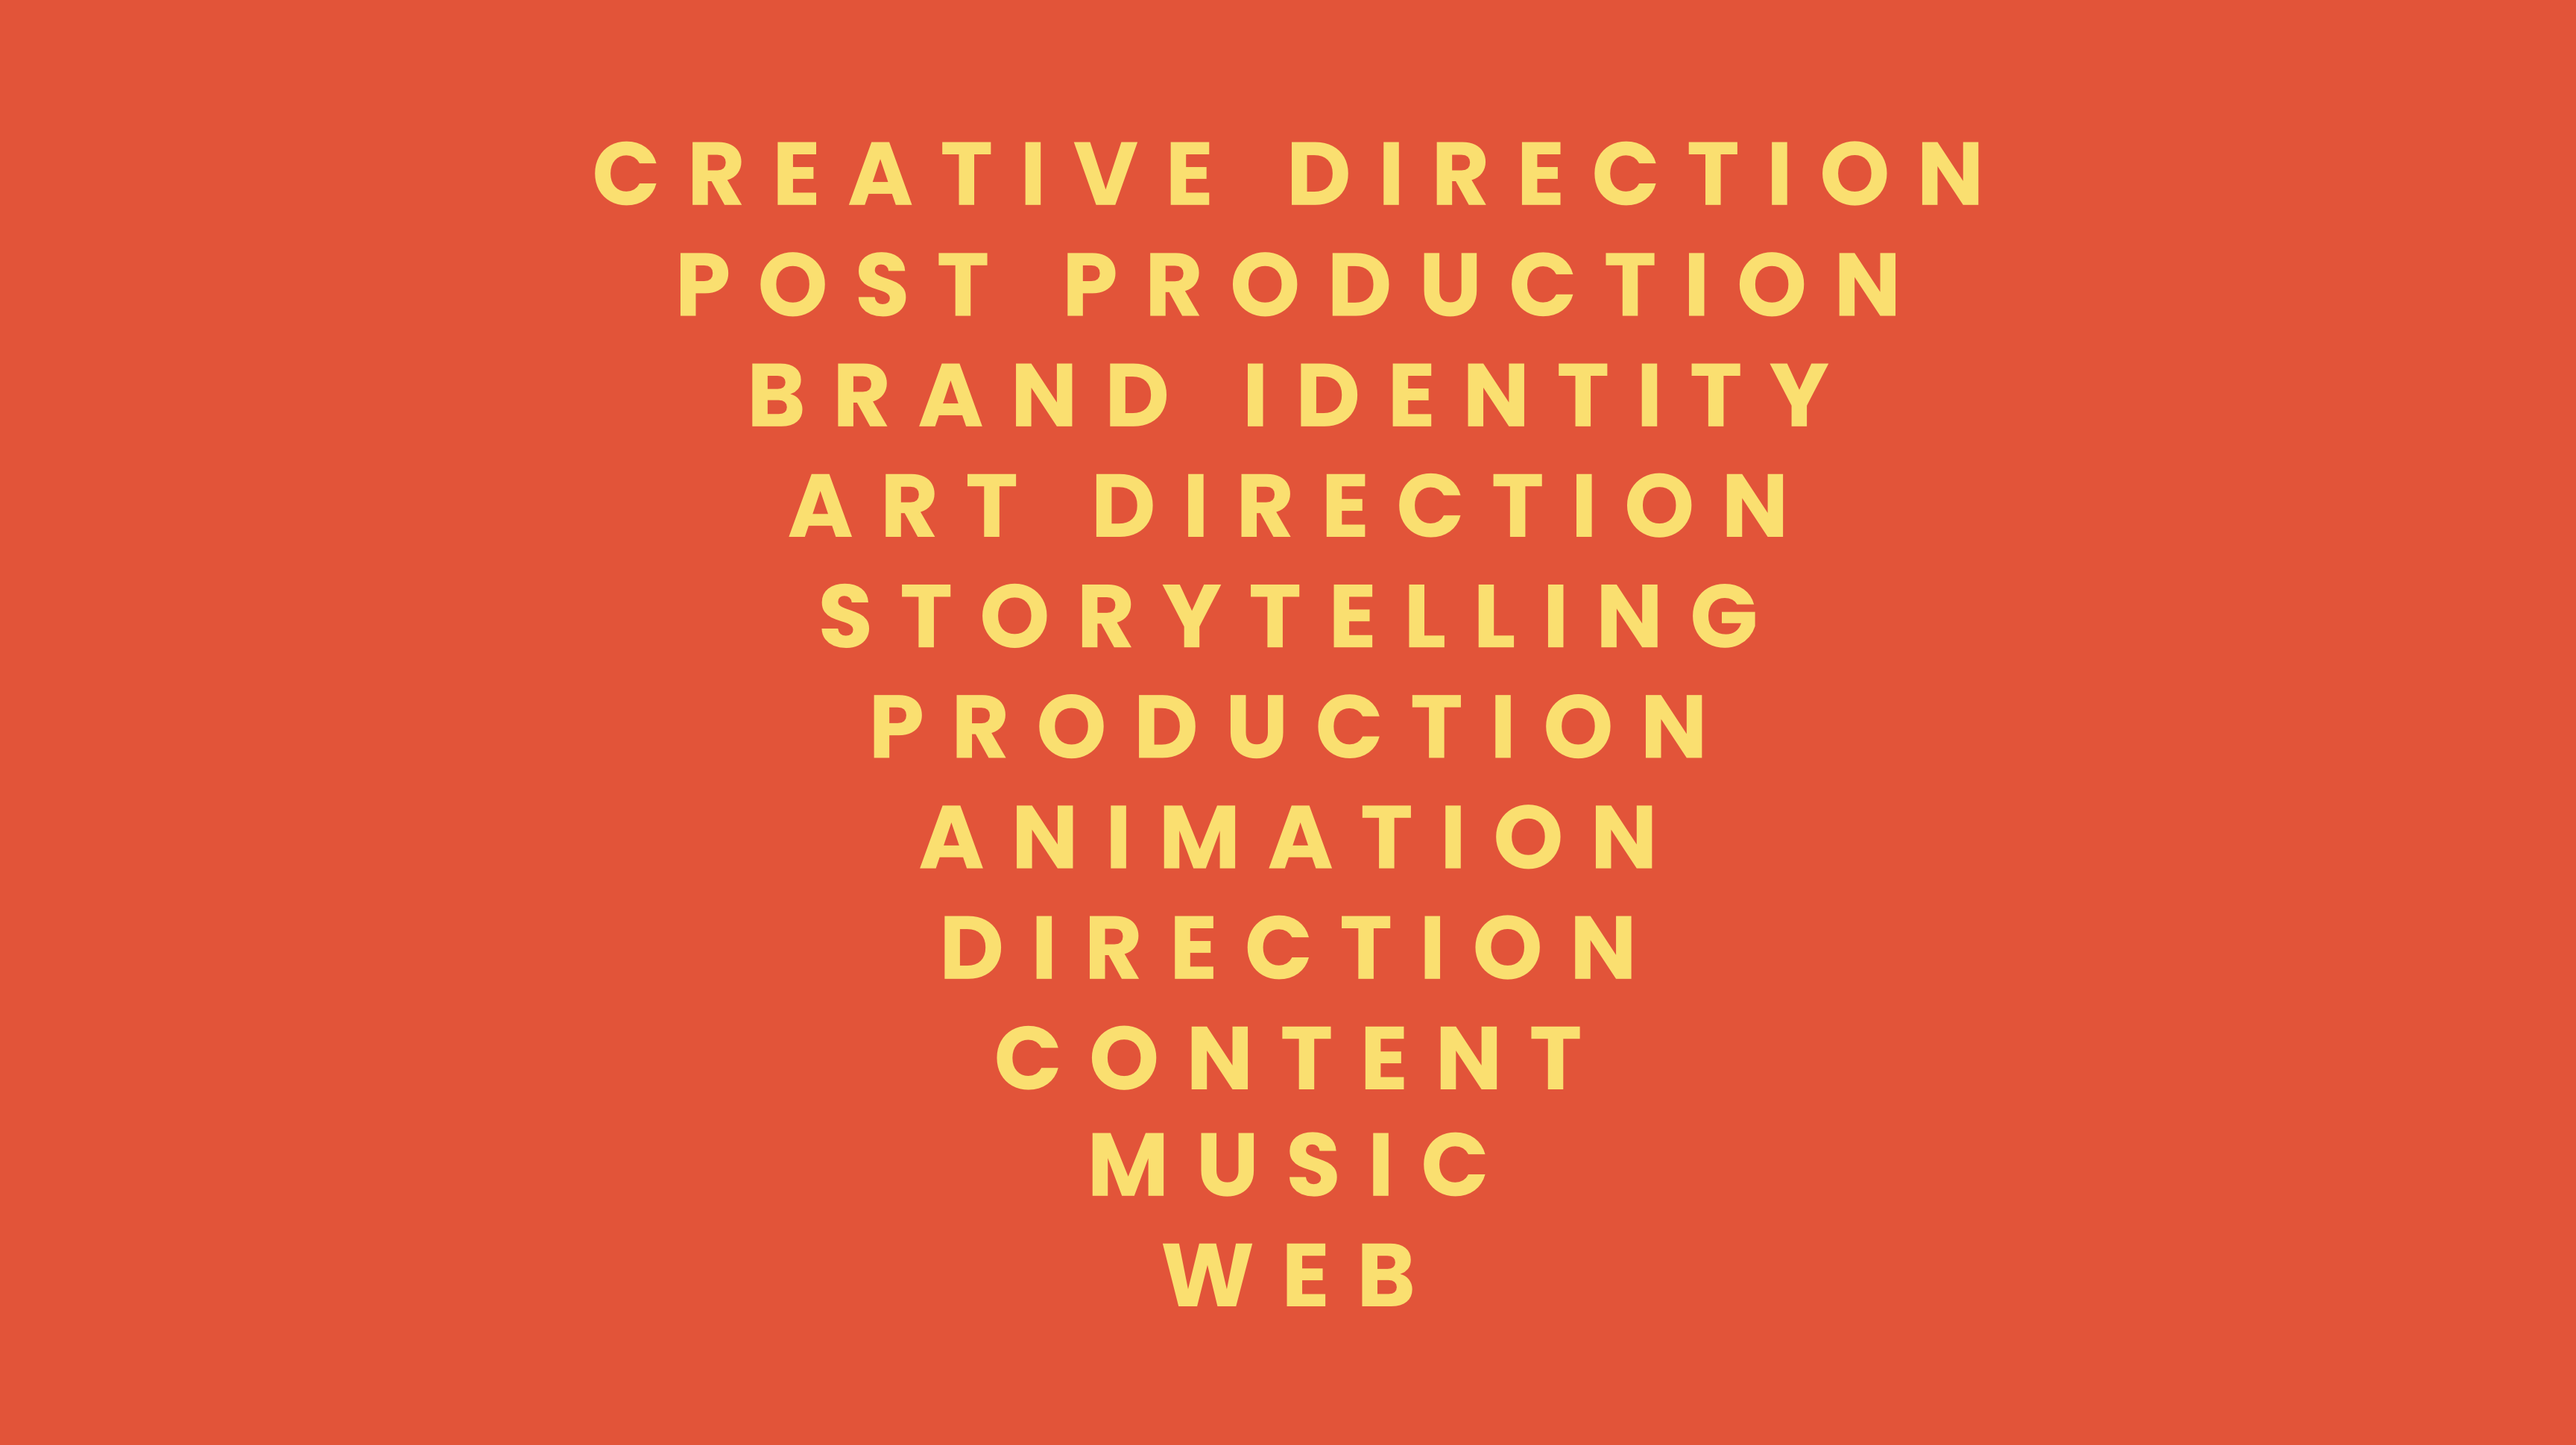 Some RIOT services include Creative Direction, Post Production, Brand Identity, Art Direction, Storytelling, Production, Animation, Direction, Content, Music, Web.